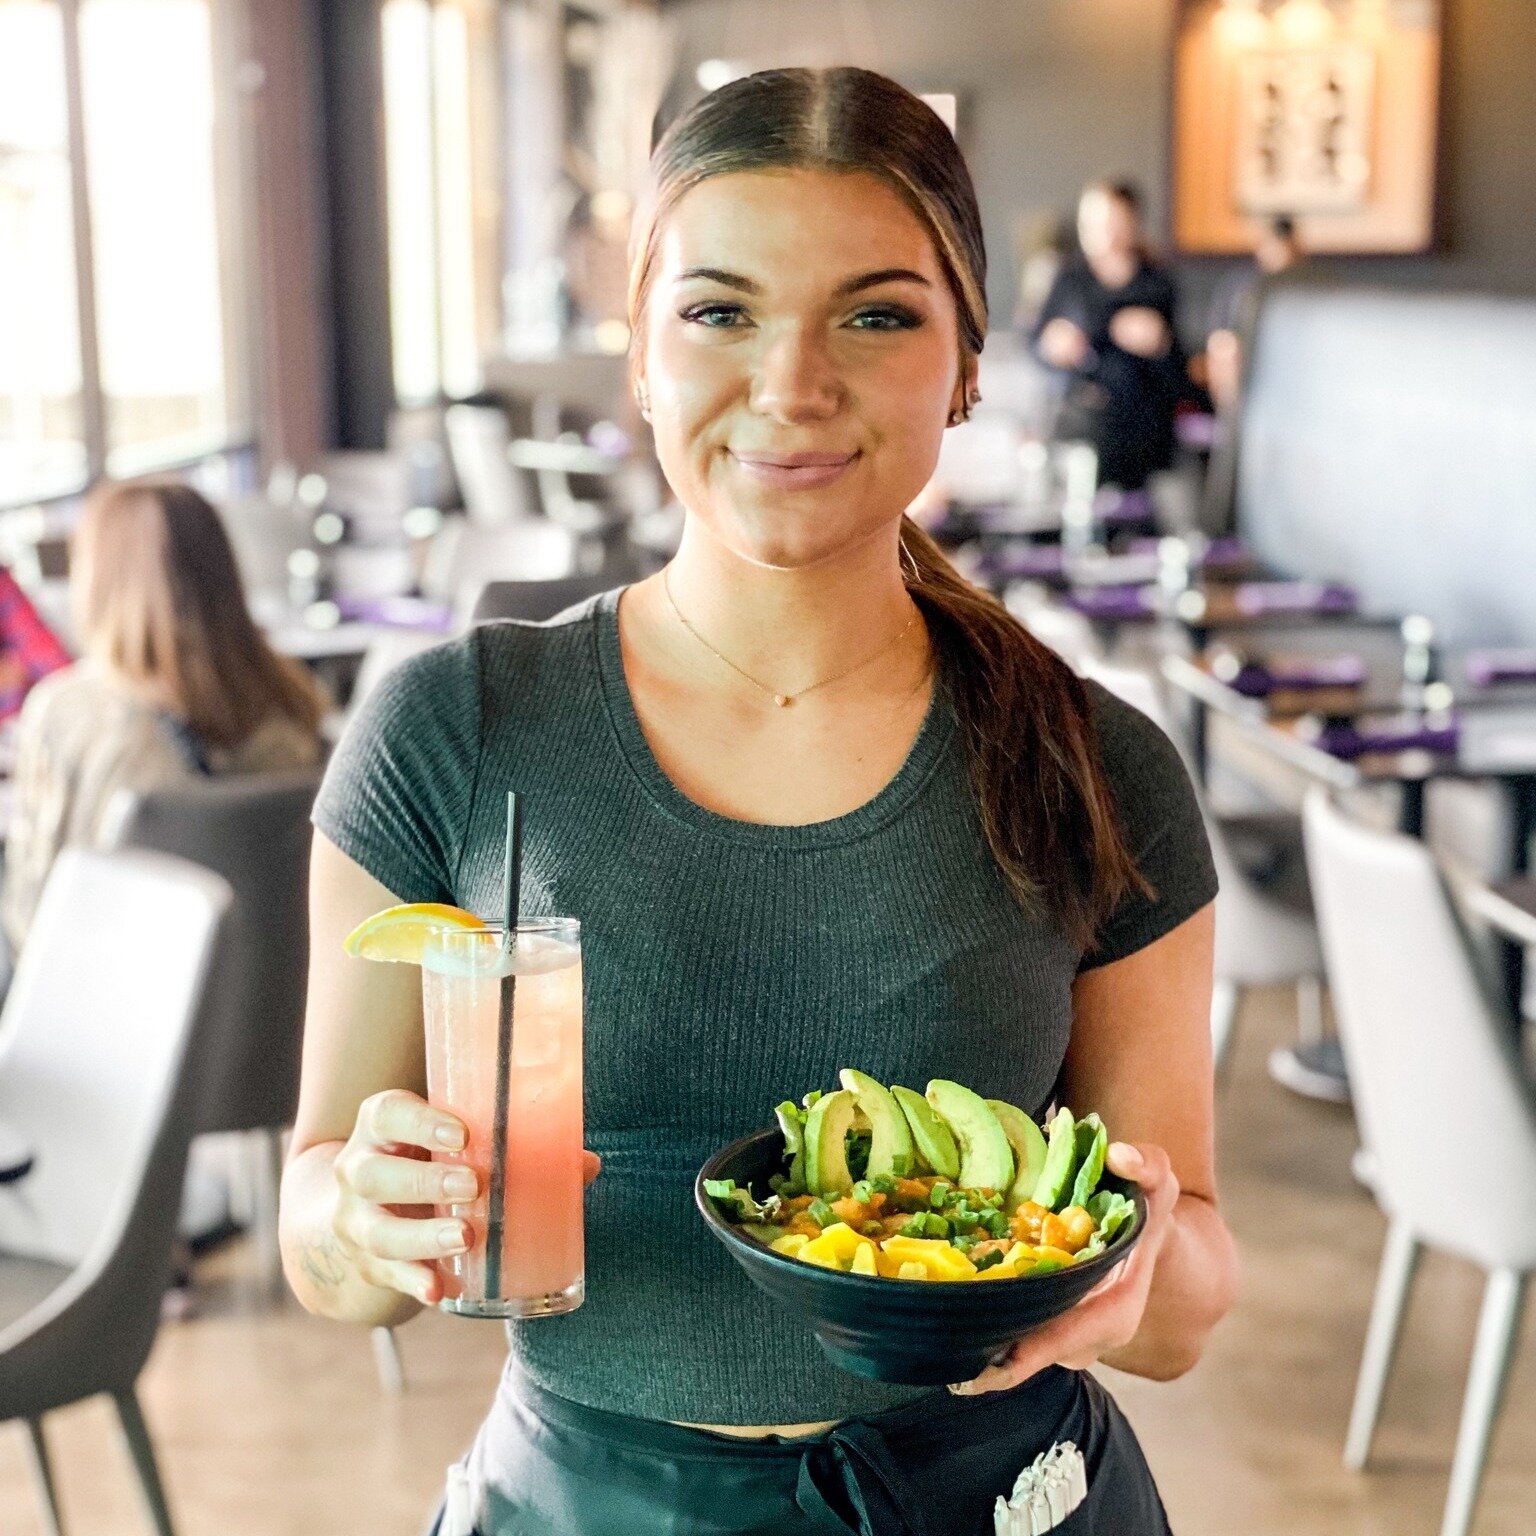 A balanced diet is one of our weekly specials in each hand. 

📸 Chipotle Mango Sweet and Sour Shrimp + Lemon strawberry bliss Mocktail. 

#tulsaeats #tulsafoodie #southtulsa